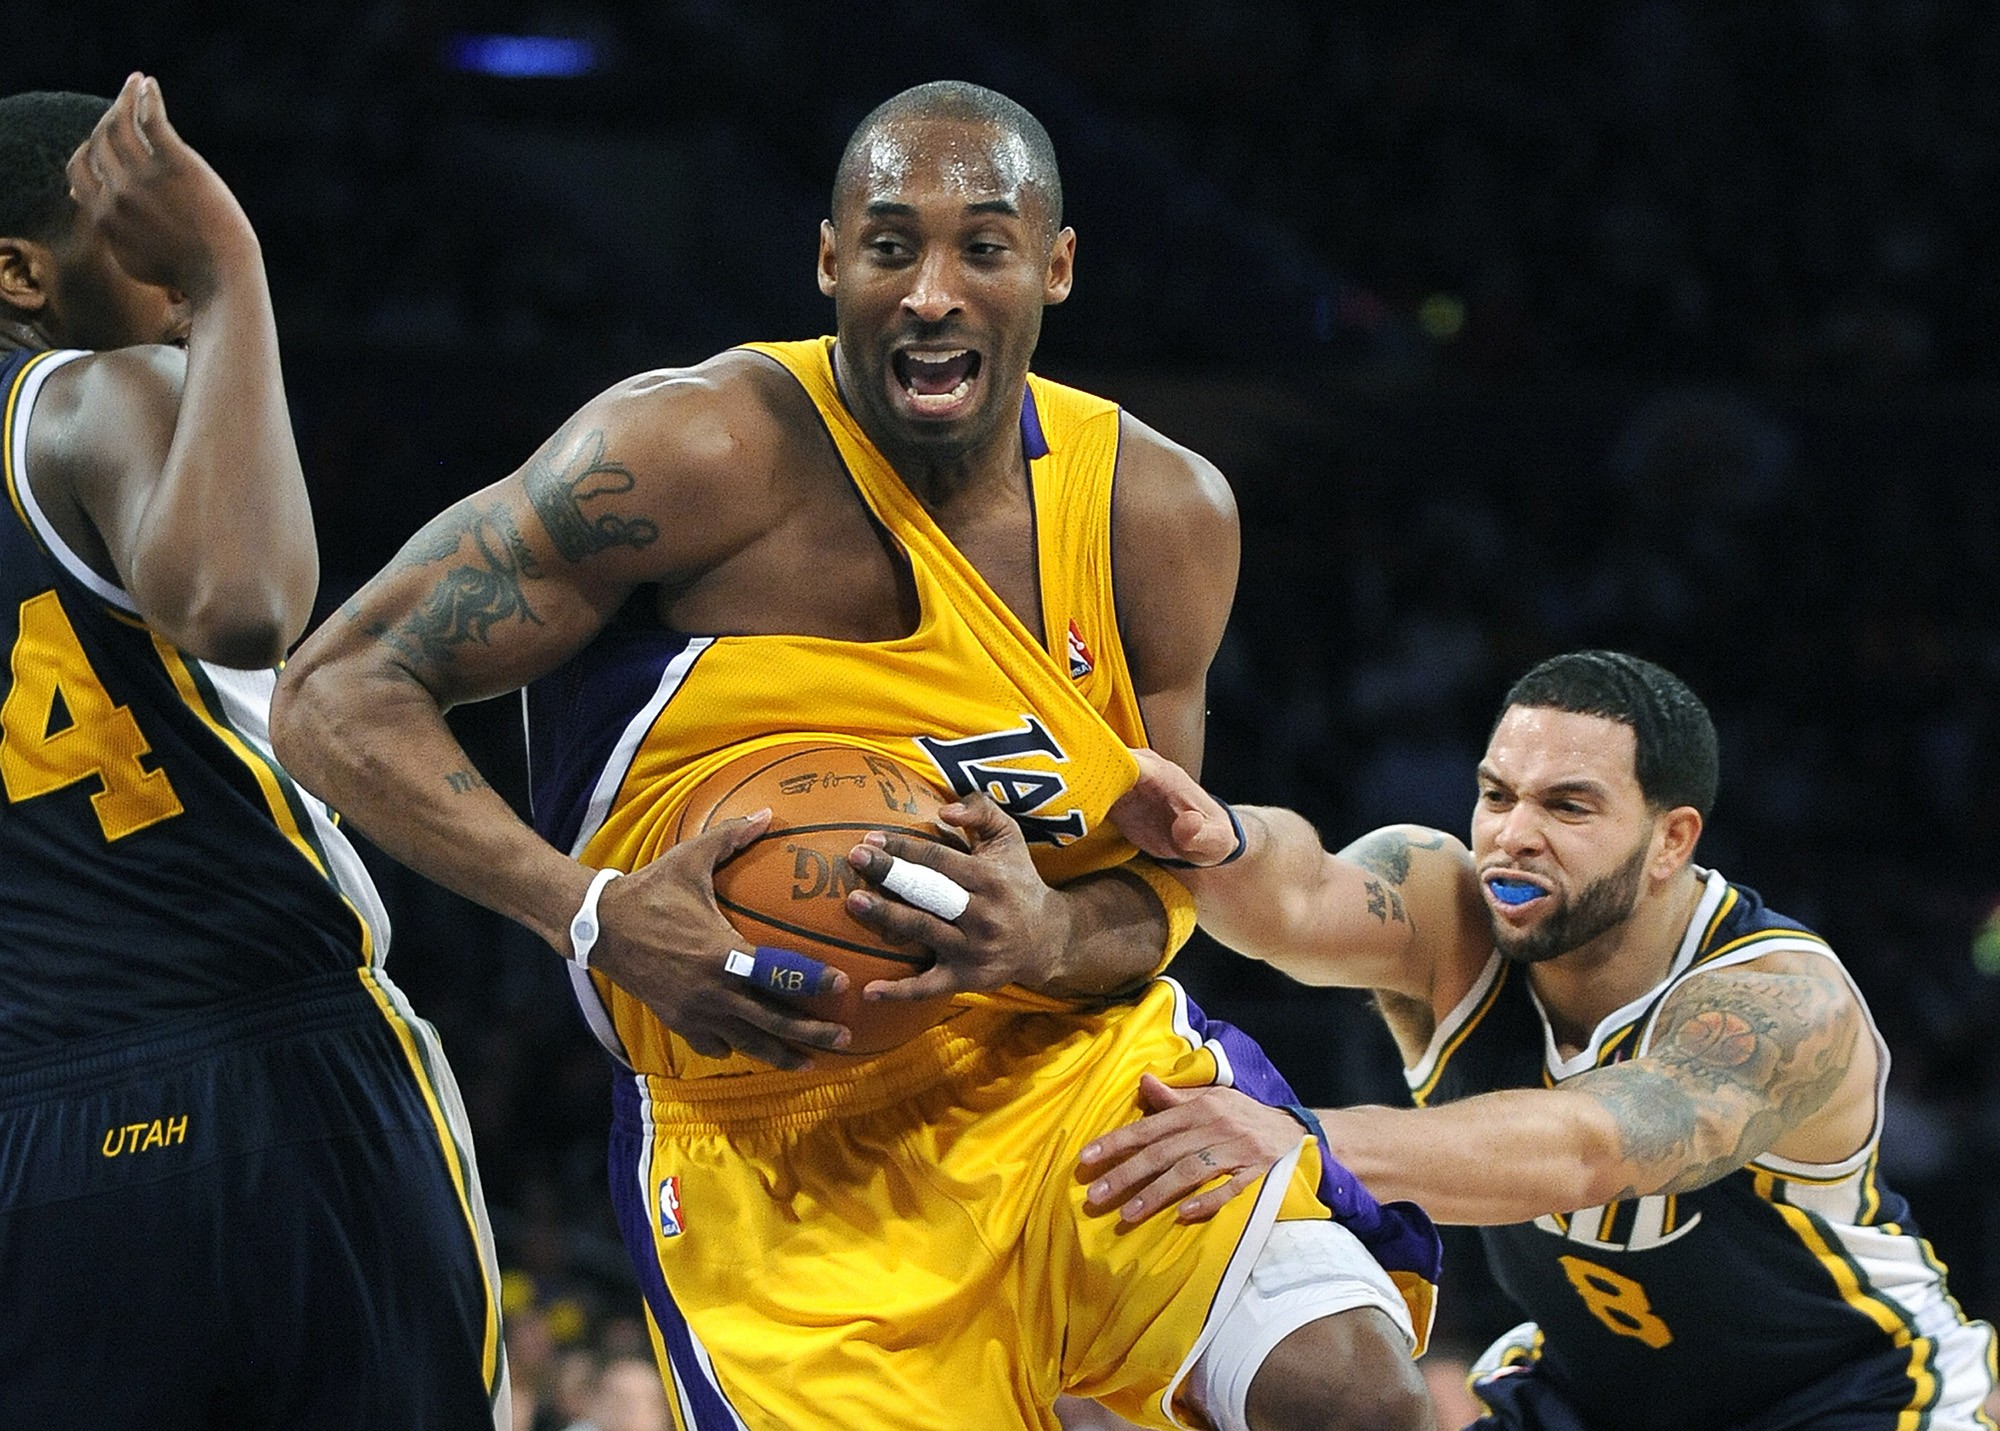 Basketball star Kobe Bryant was a reader as well as a writer, and the Los Angeles Public library has compiled a list of his recommended books. Photo: Wally Skalij/LA Times/MCT